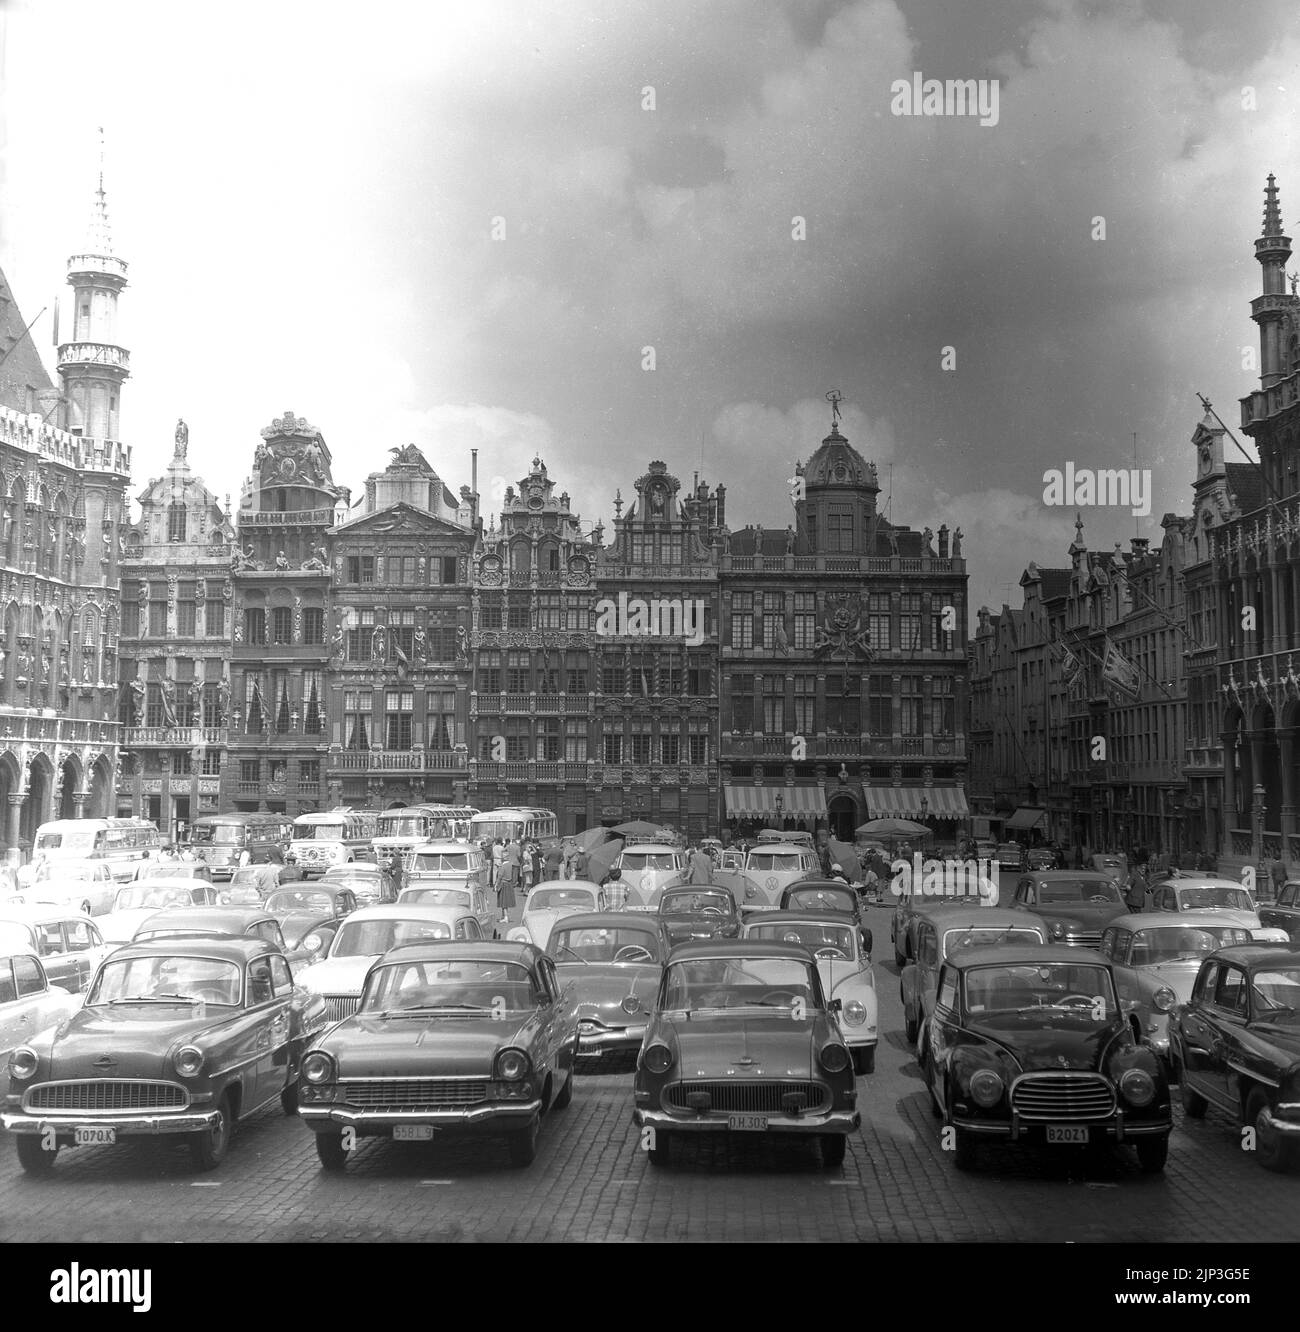 1960s, historical, cars of the era parked at the Grand-Place, the historic central square of Brussels, Belgium. In this era, one could park a car in front of the 17th century buildings and so the city square became a large car park. The car was modern, the car was king. In the early 1970s, an article by British journalist John Lambert started a movement to change this and so in March 1972, private parking was banned from March to September, although cars could still drive through the square. It was only in 1990 that the square became fully pedestrianised with all traffic banned. Stock Photo